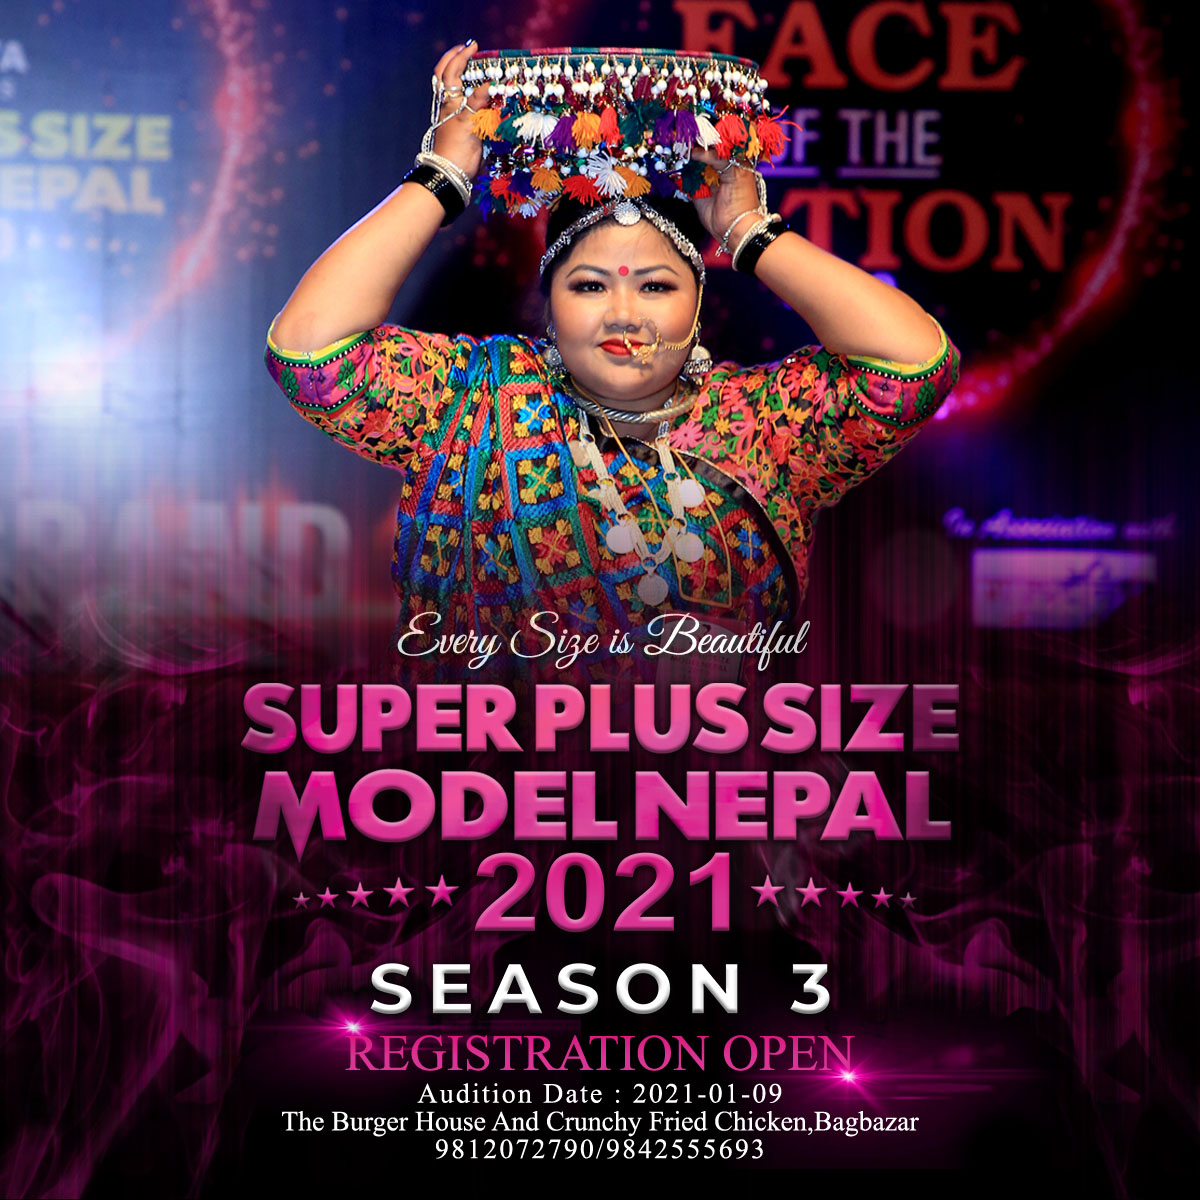 Gearing up for 'Super Plus Size Model Nepal 2021’